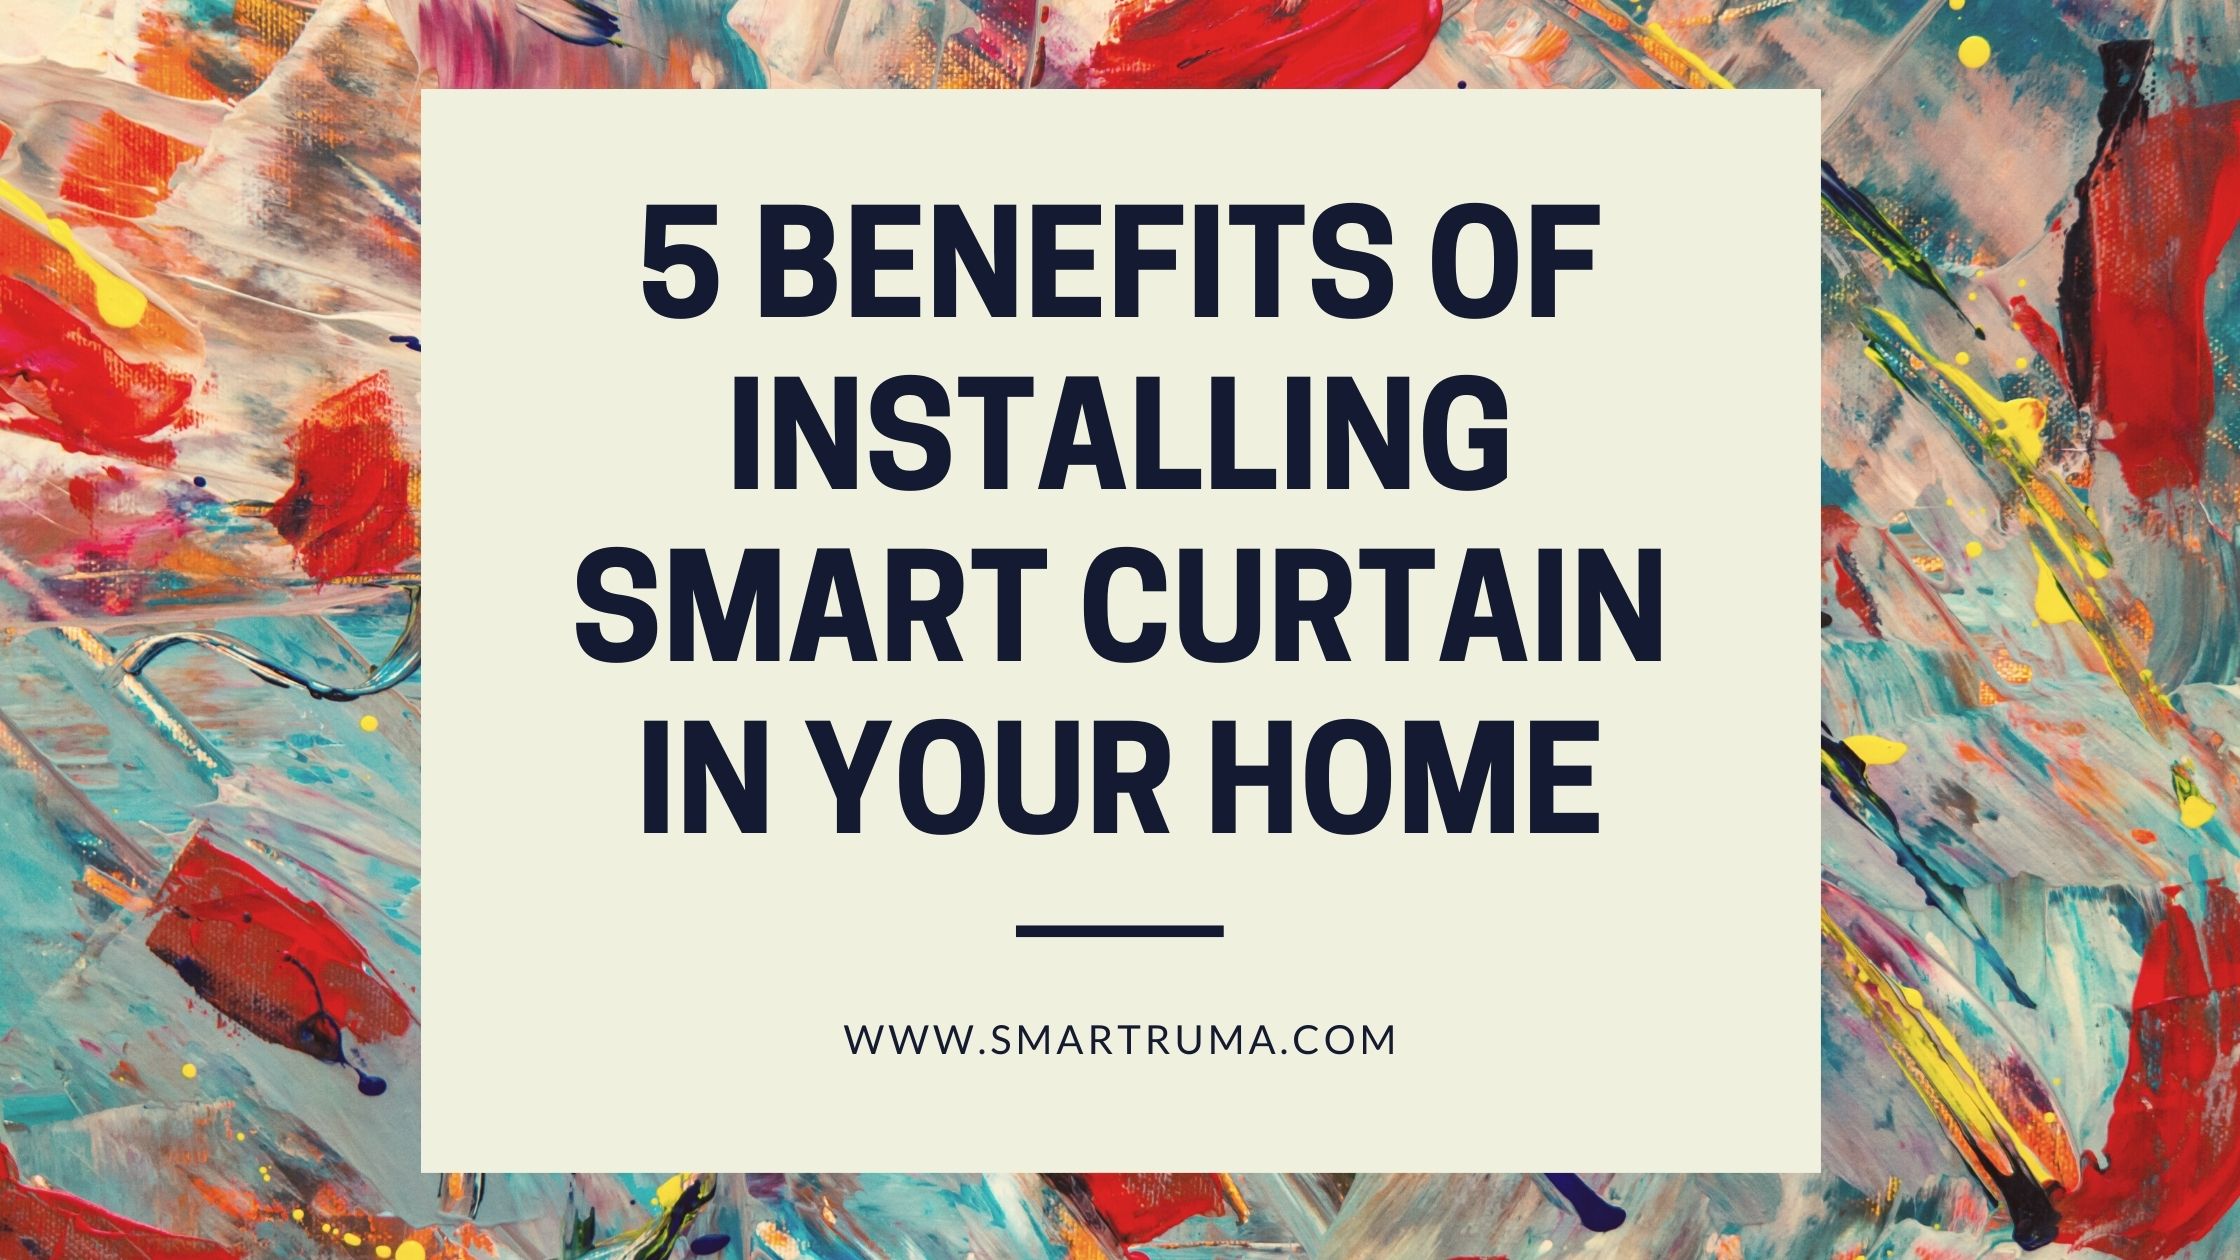 5 Benefits of Installing Smart Curtain In Your Home